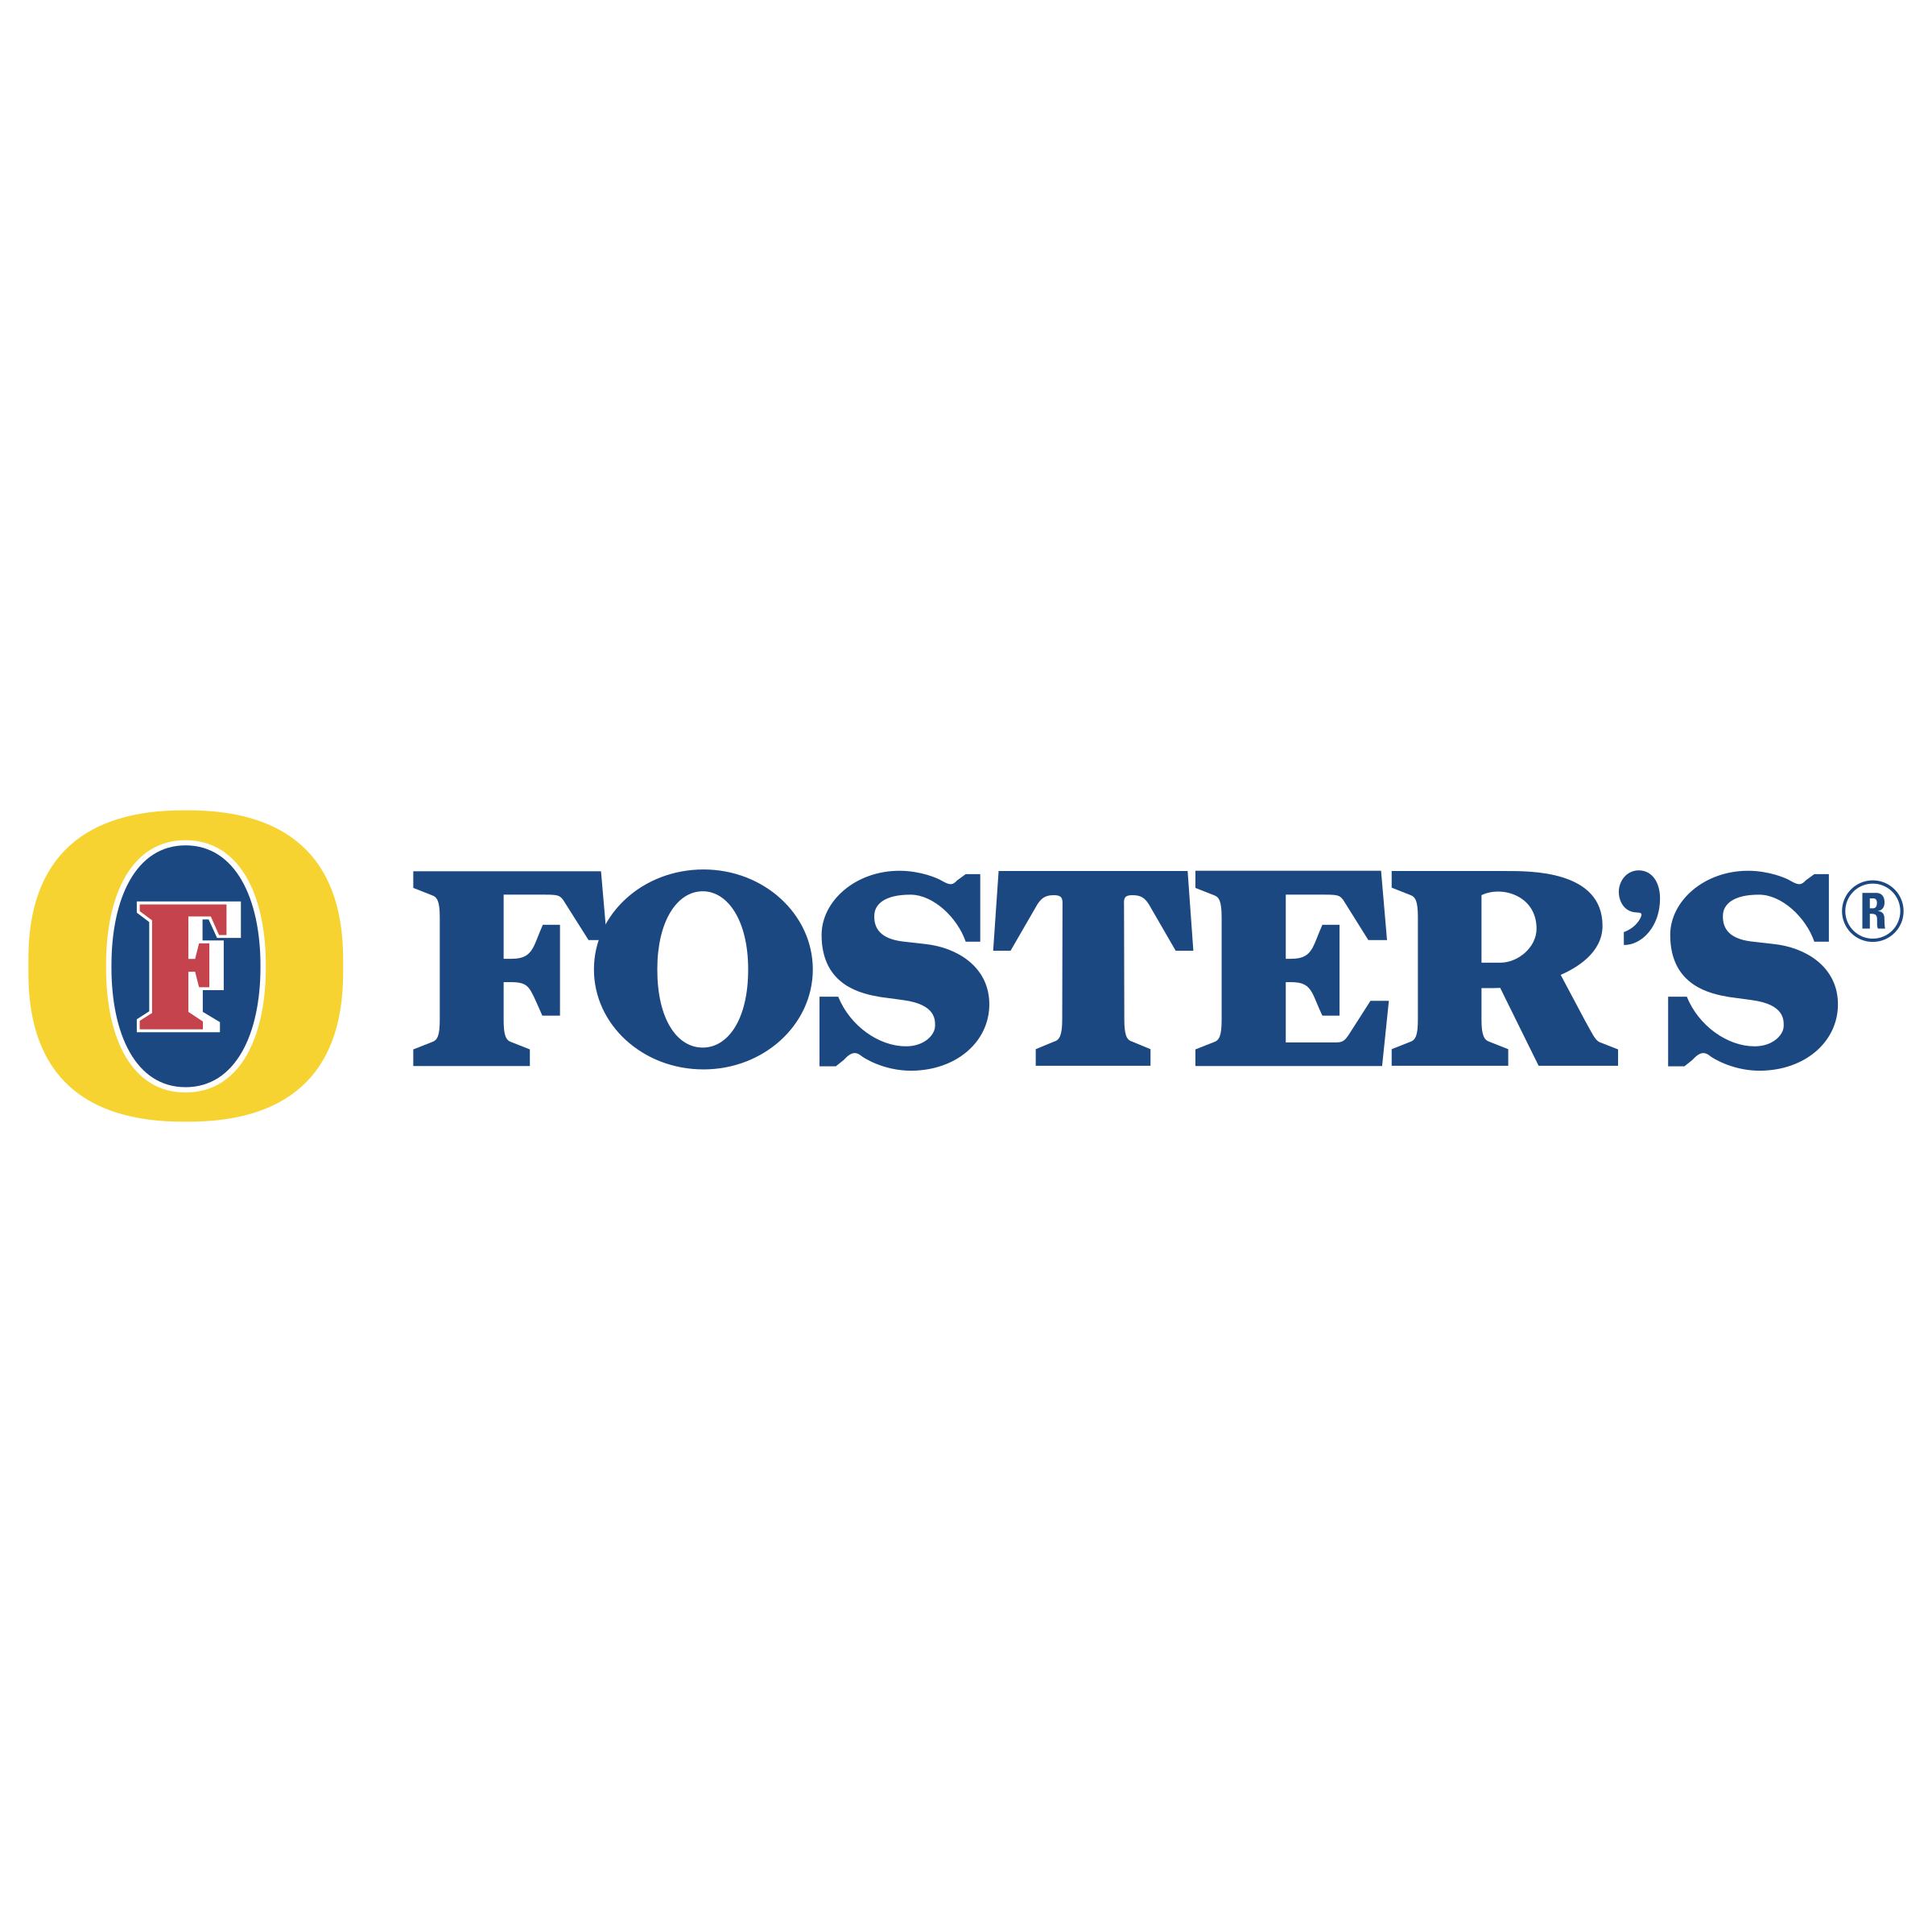 Fosters Logo - Foster's Logo PNG Transparent & SVG Vector